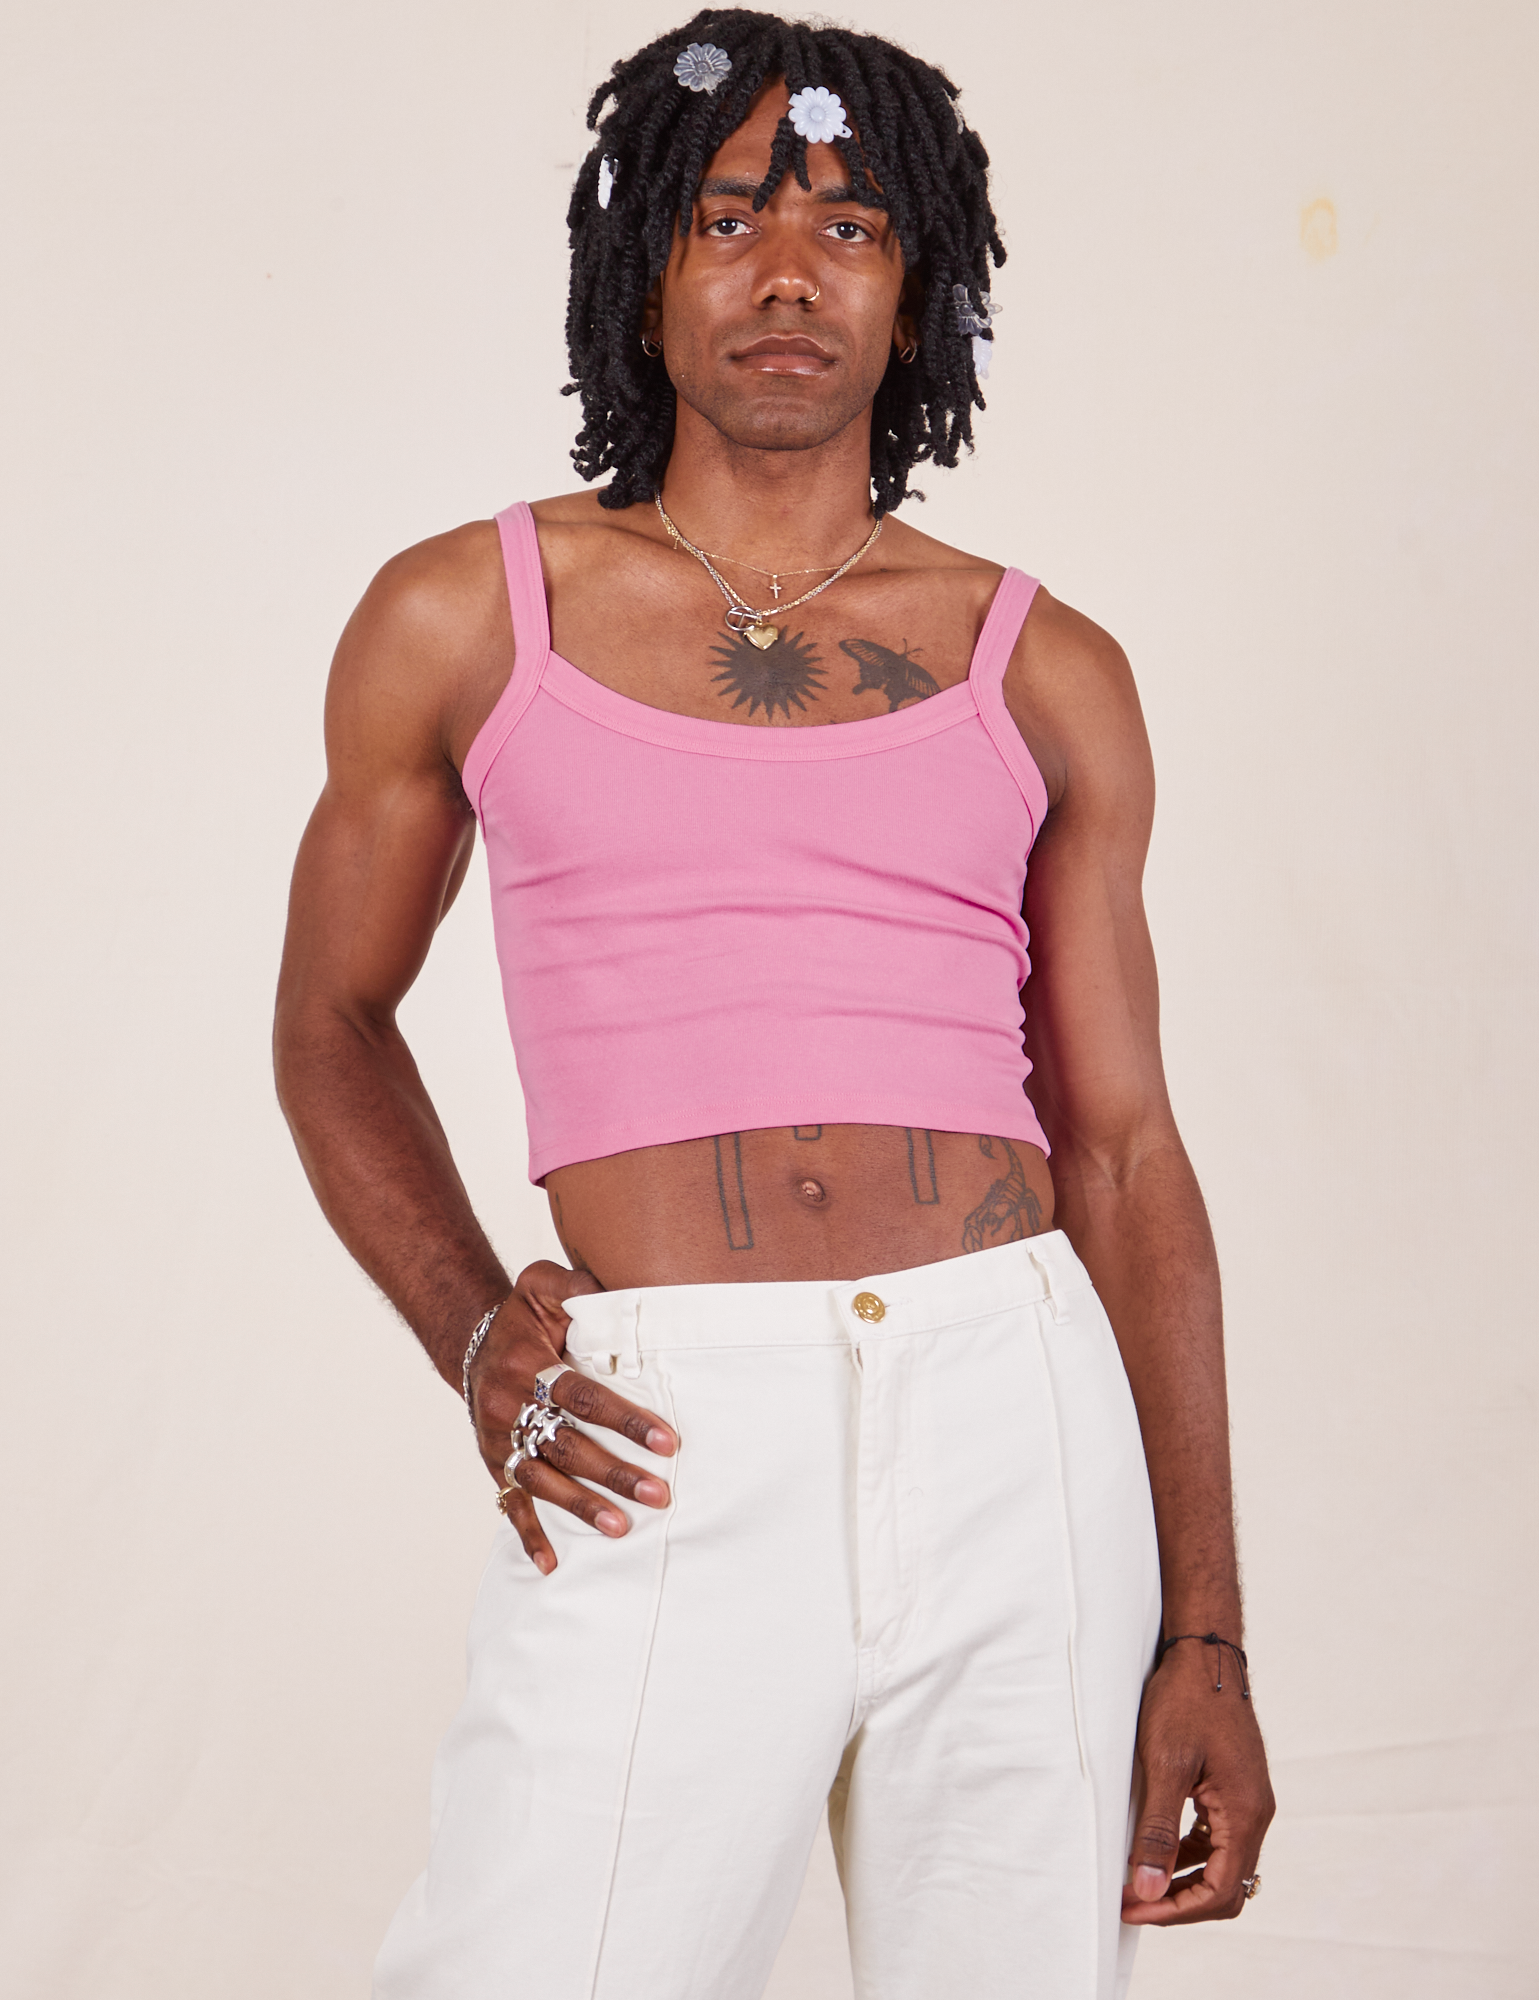 Jerrod is 6&#39;3&quot; and wearing S Cropped Cami in Bubblegum Pink paired with vintage tee off-white Western Pants